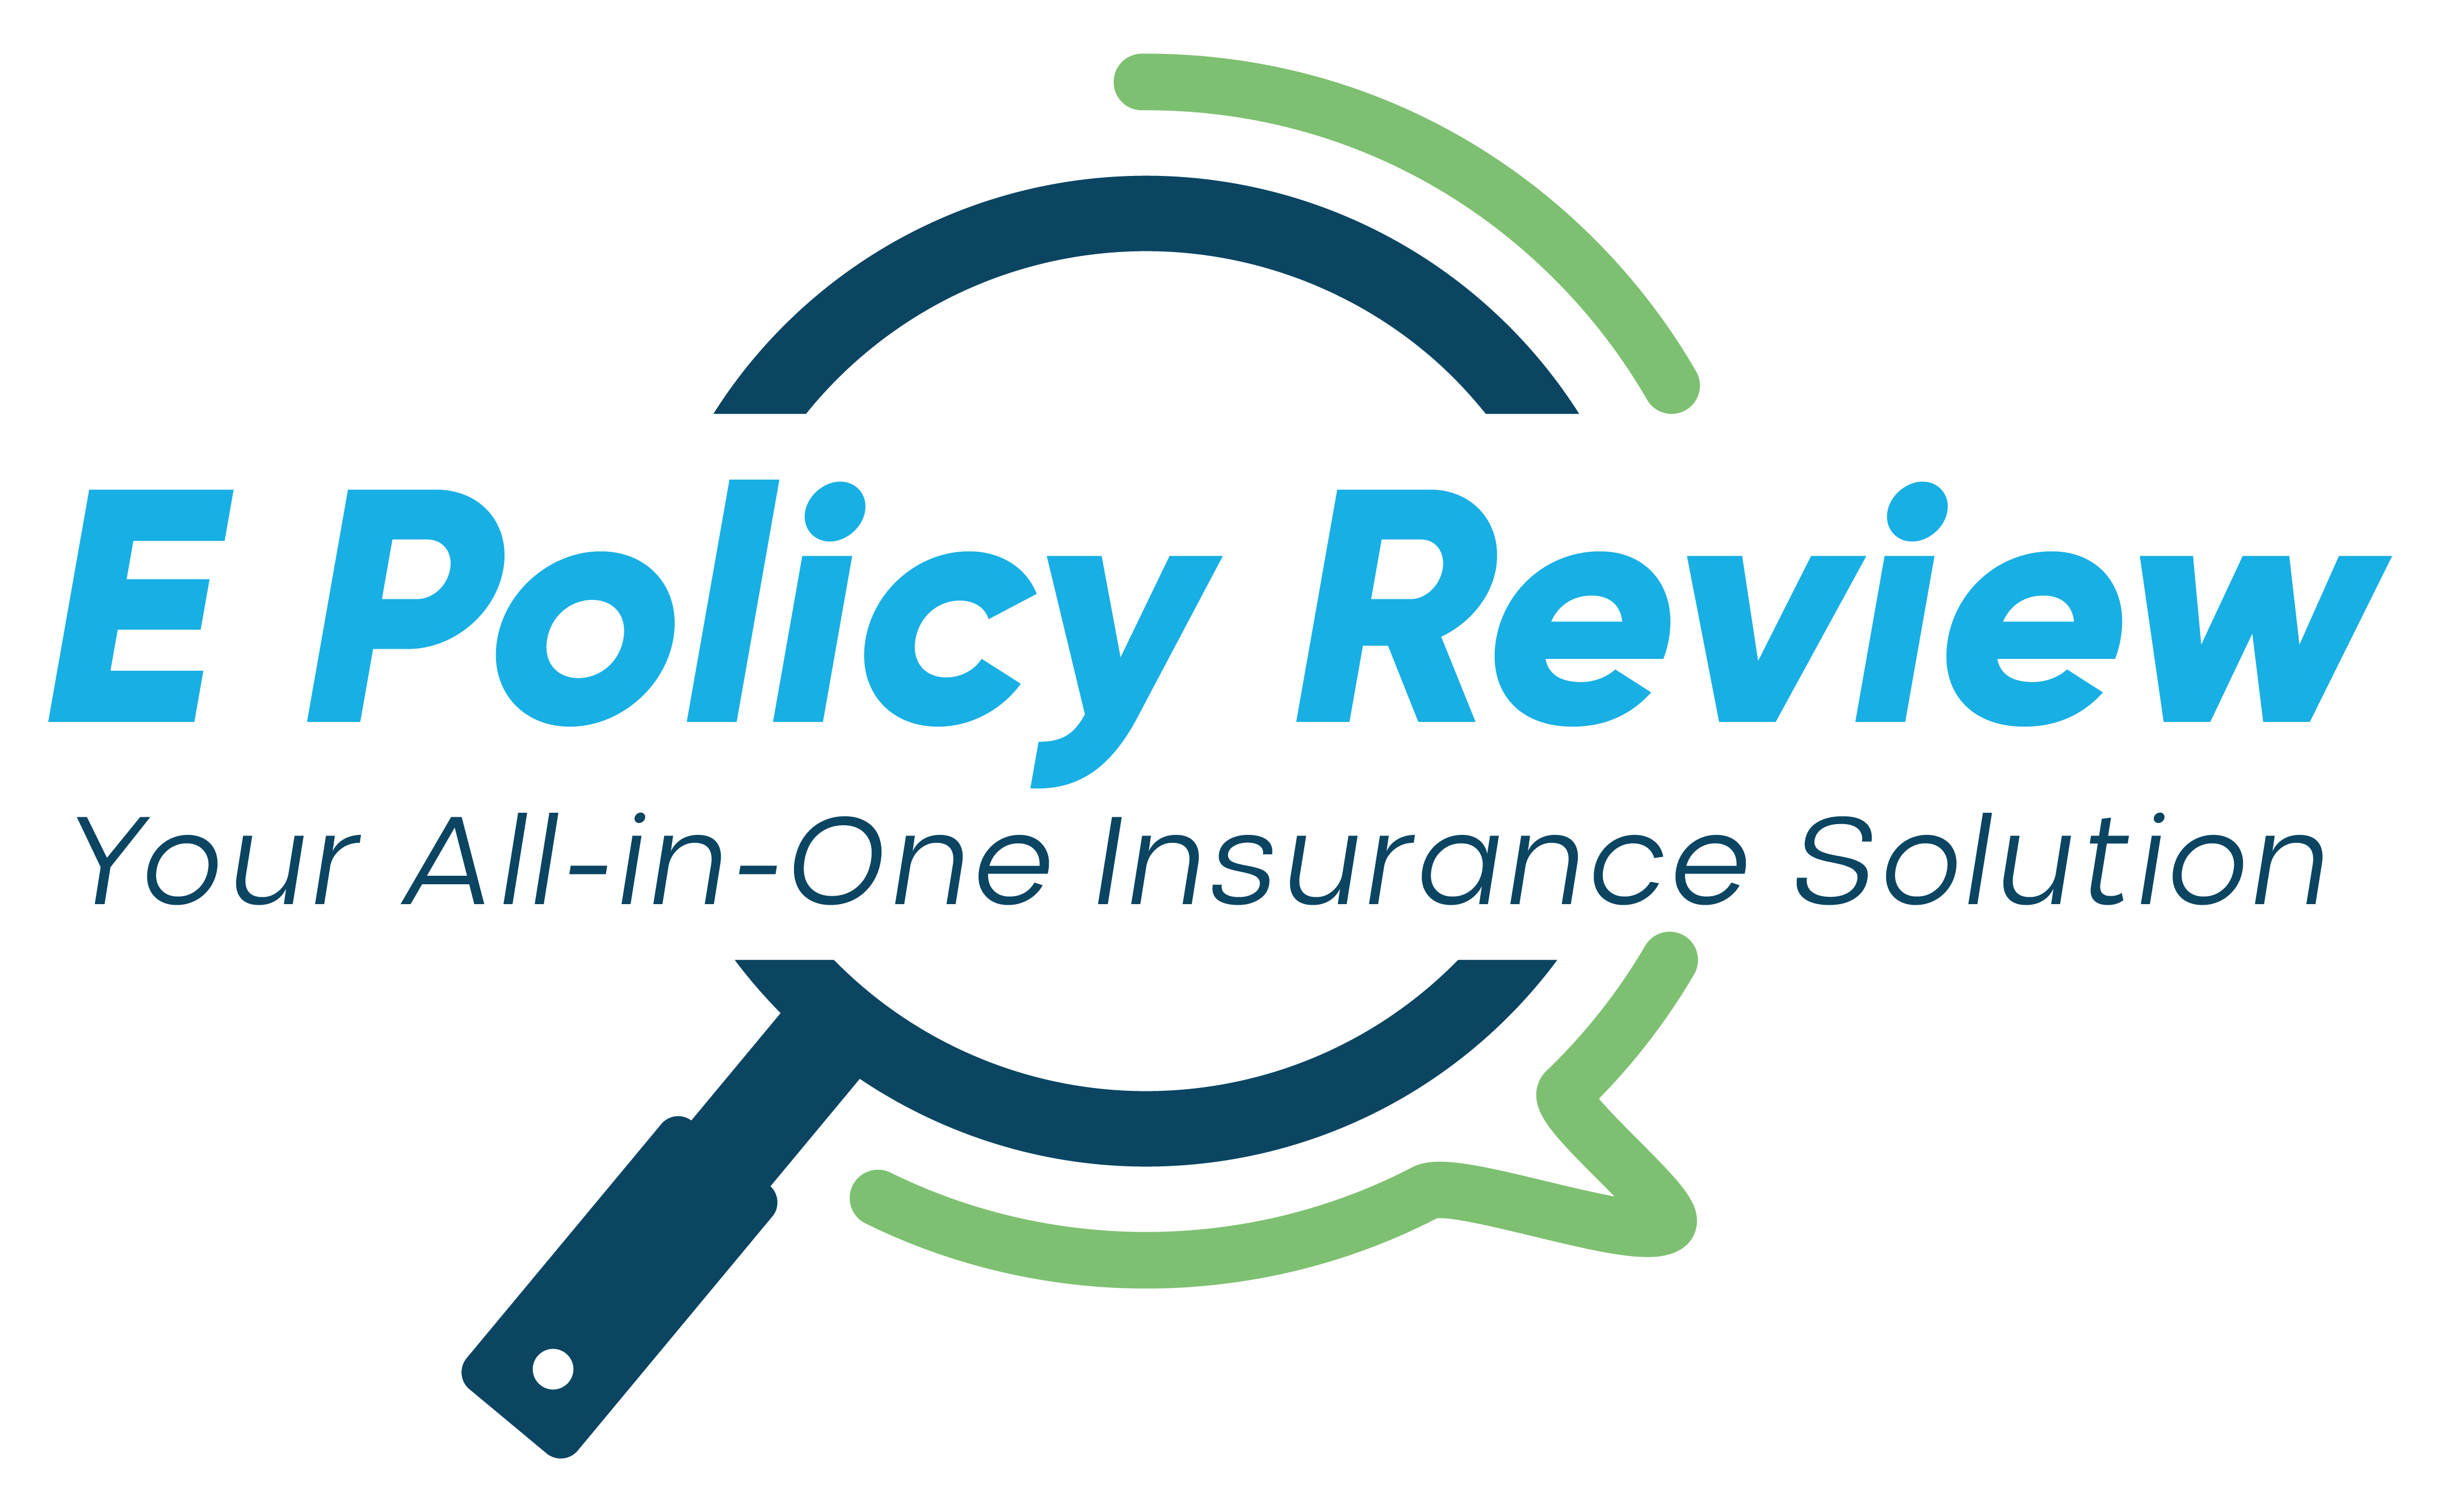 E Policy Review